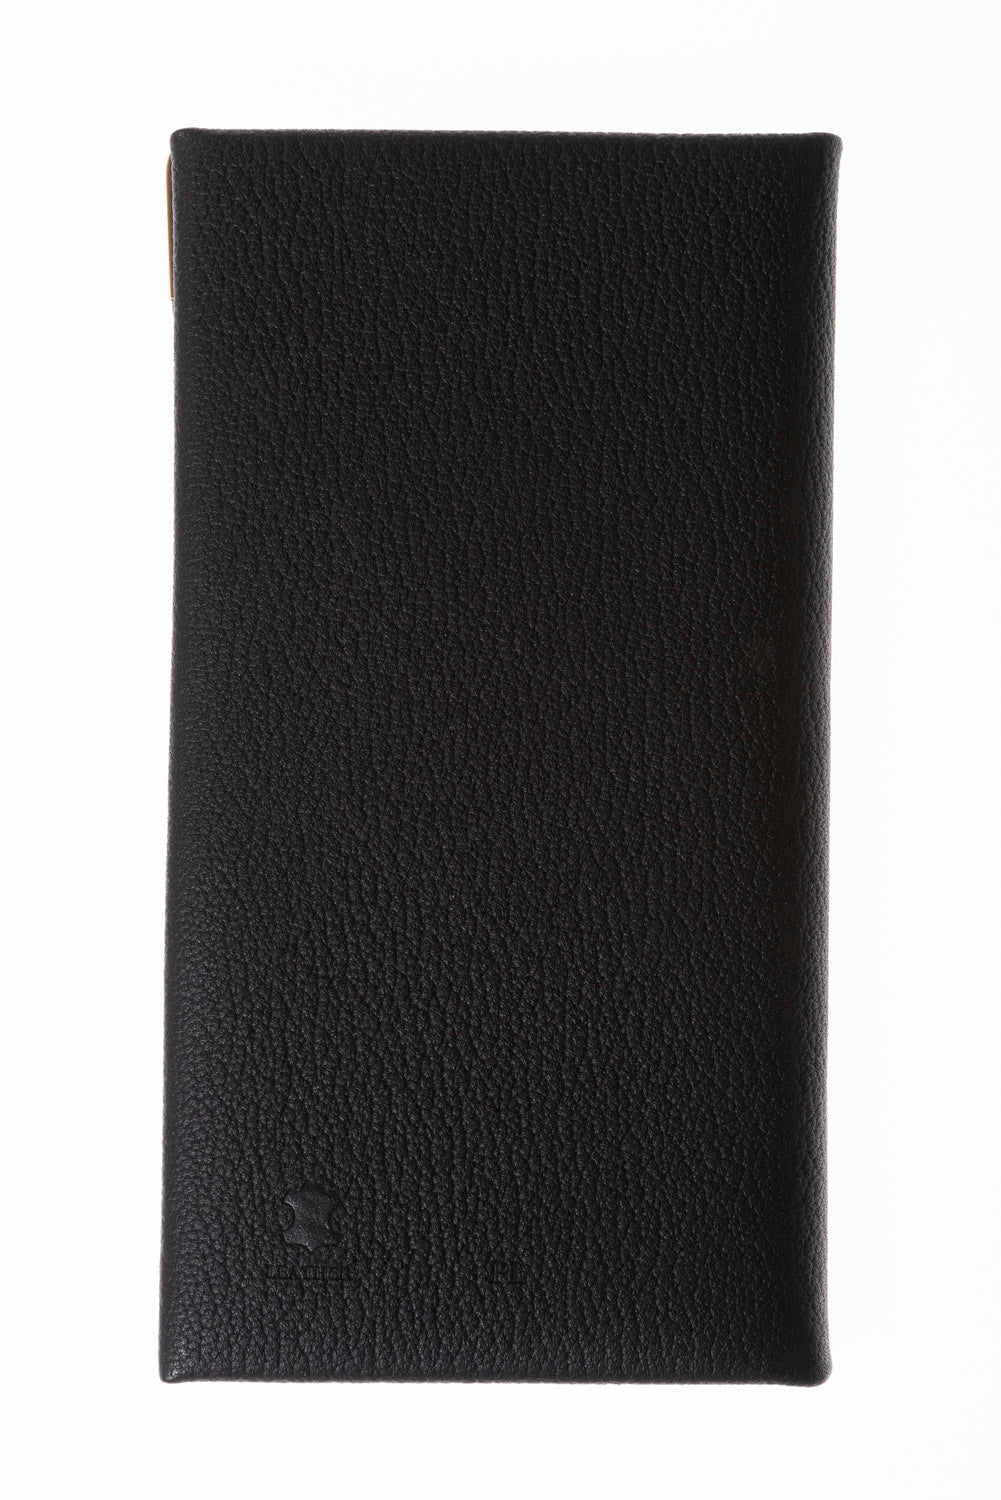 2024 Leather Portrait Pocket Diary - Week-to-View Planner- Black (PL-24)